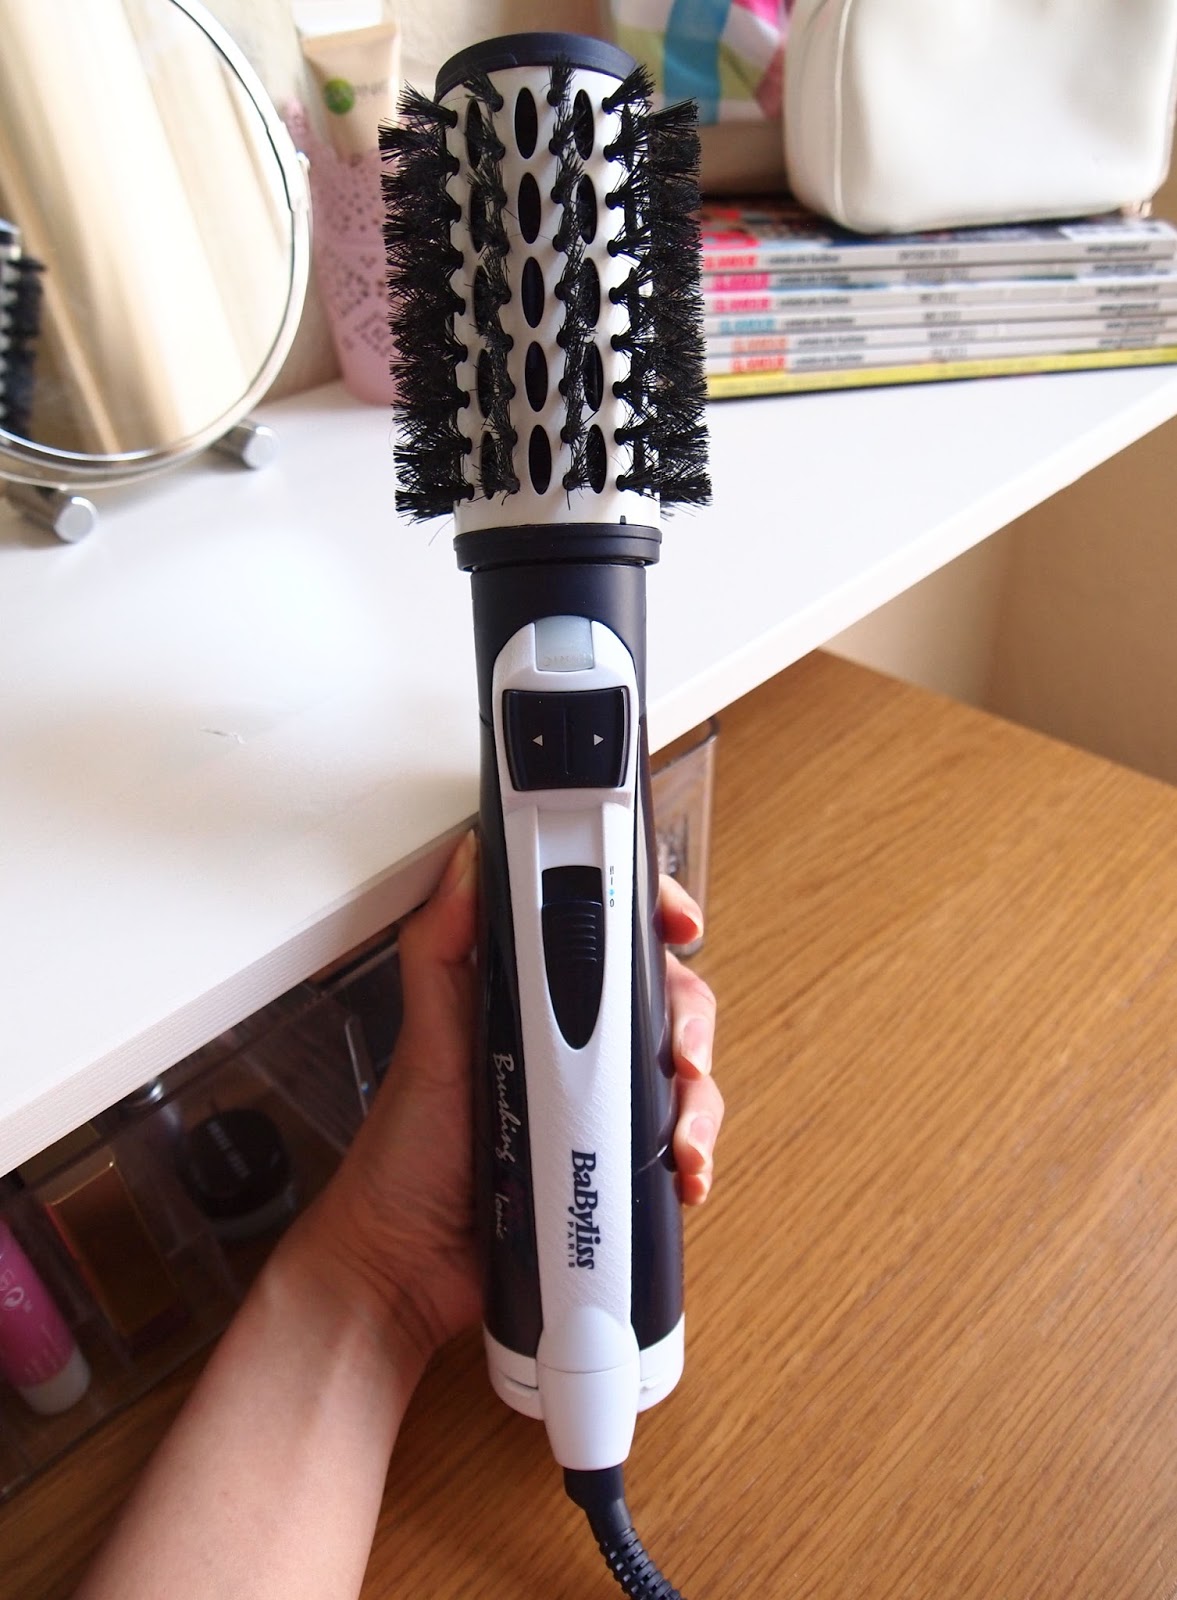 liefde ornament inzet Babyliss iPro Rotating Brush 800 Review — Giselle Arianne